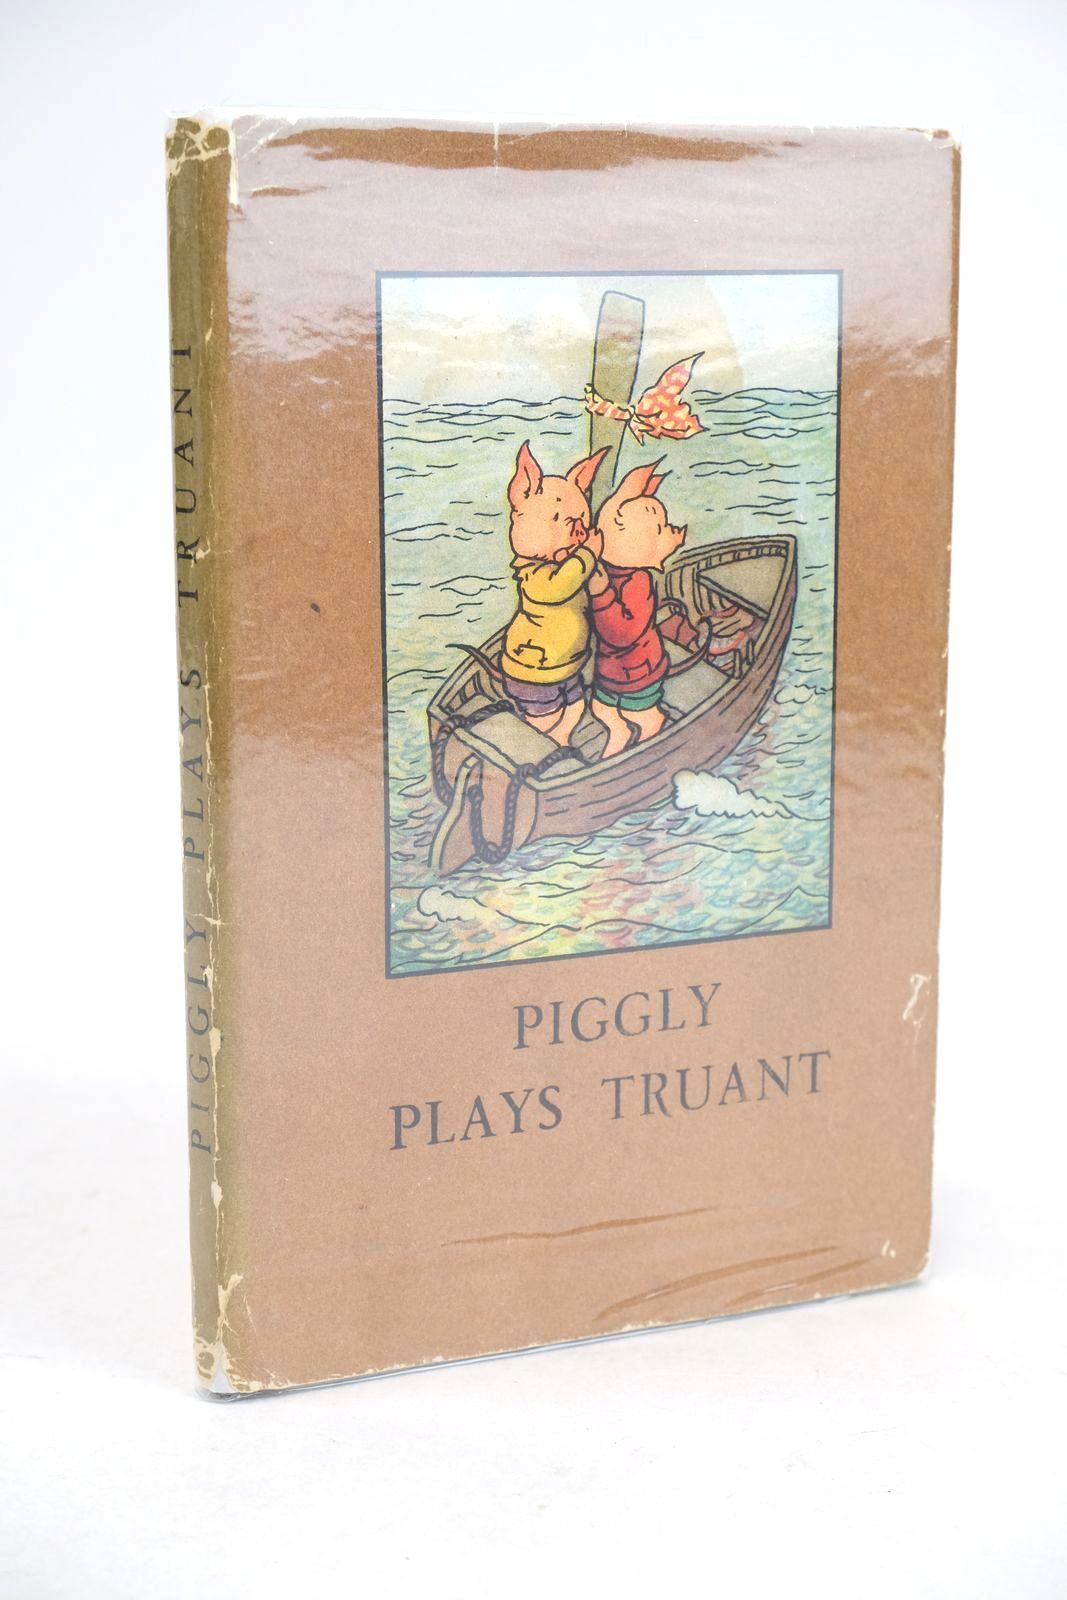 Photo of PIGGLY PLAYS TRUANT written by Macgregor, A.J.
Perring, W. illustrated by Macgregor, A.J. published by Wills & Hepworth Ltd. (STOCK CODE: 1325478)  for sale by Stella & Rose's Books